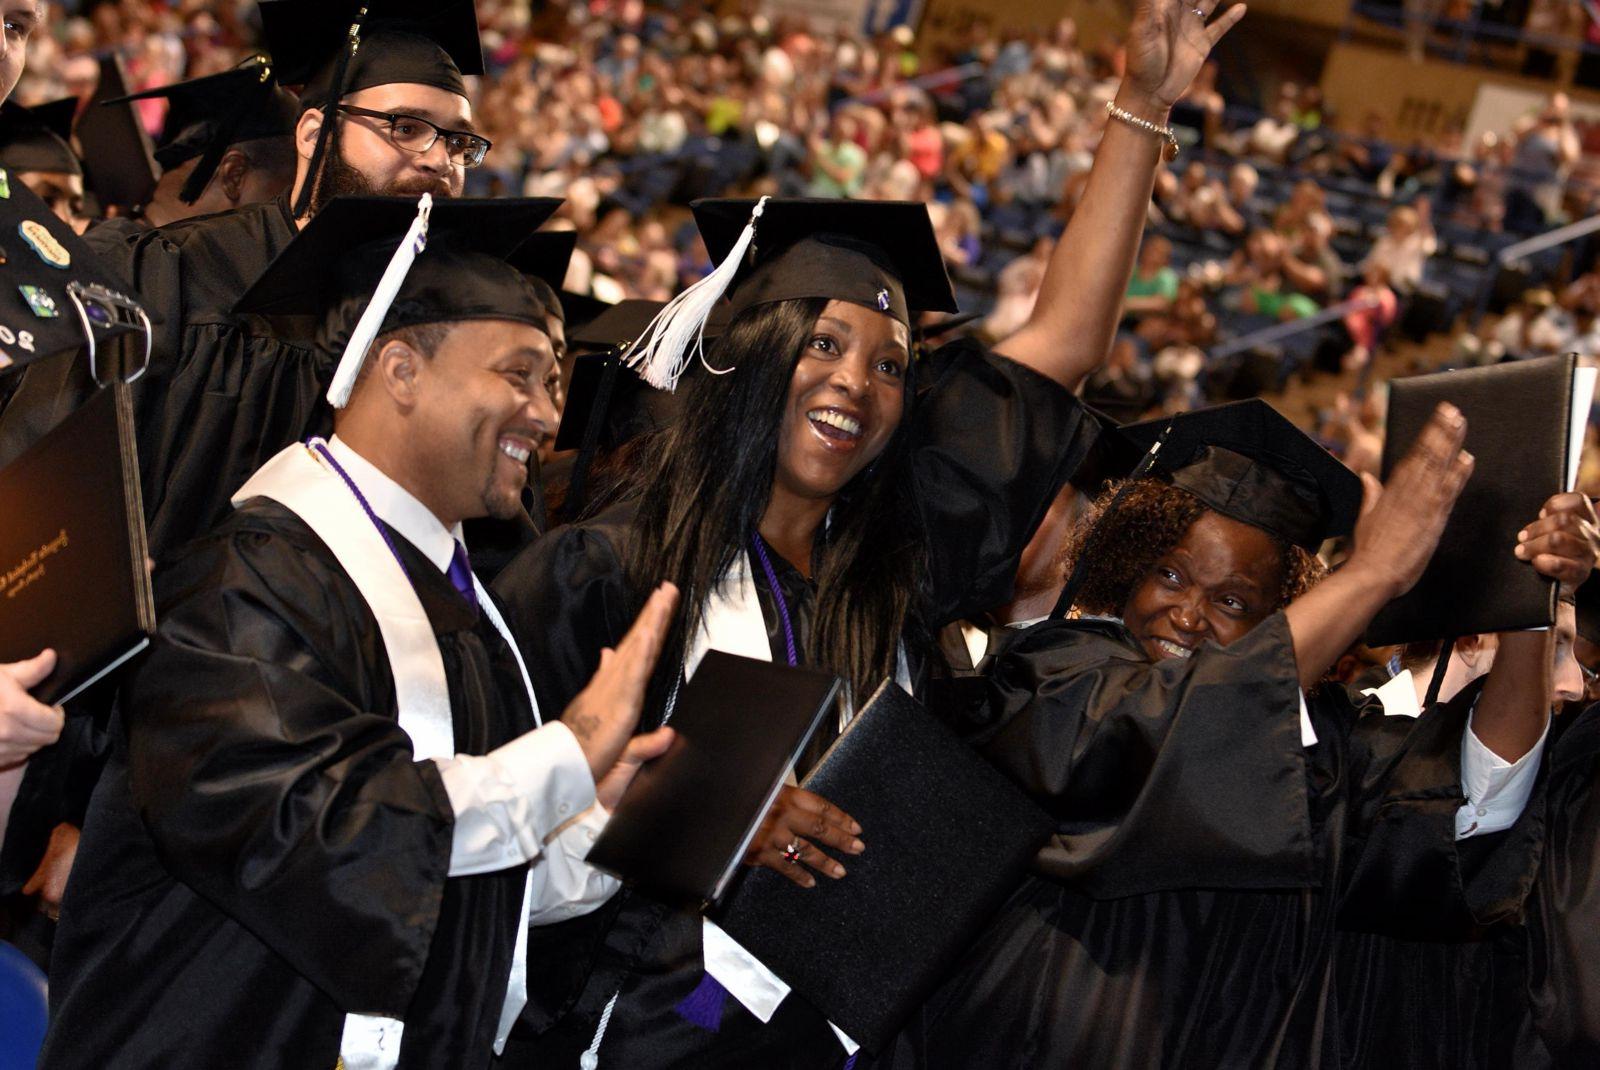 A forest green, hyperlinked, button labeled 技术信用证书 in white, bolded, underlined text with an image of a crowded gathering of graduates and family focusing on four graduates wearing black graduate caps and gowns with white tassels and stoles: an African American female smiles while holding a black diploma/degree holder up with her left hand placed on the side, to her left an African American female smiles and raises her right hand wearing a metal bracelet while holding her black degree/diploma holder in her left hand, an African American male stand smiling and holding his black diploma/degree holder in his right hand with his left hand held up behind it, and a Caucasian male with a  black beard and glasses stands behind and to the right of those three.